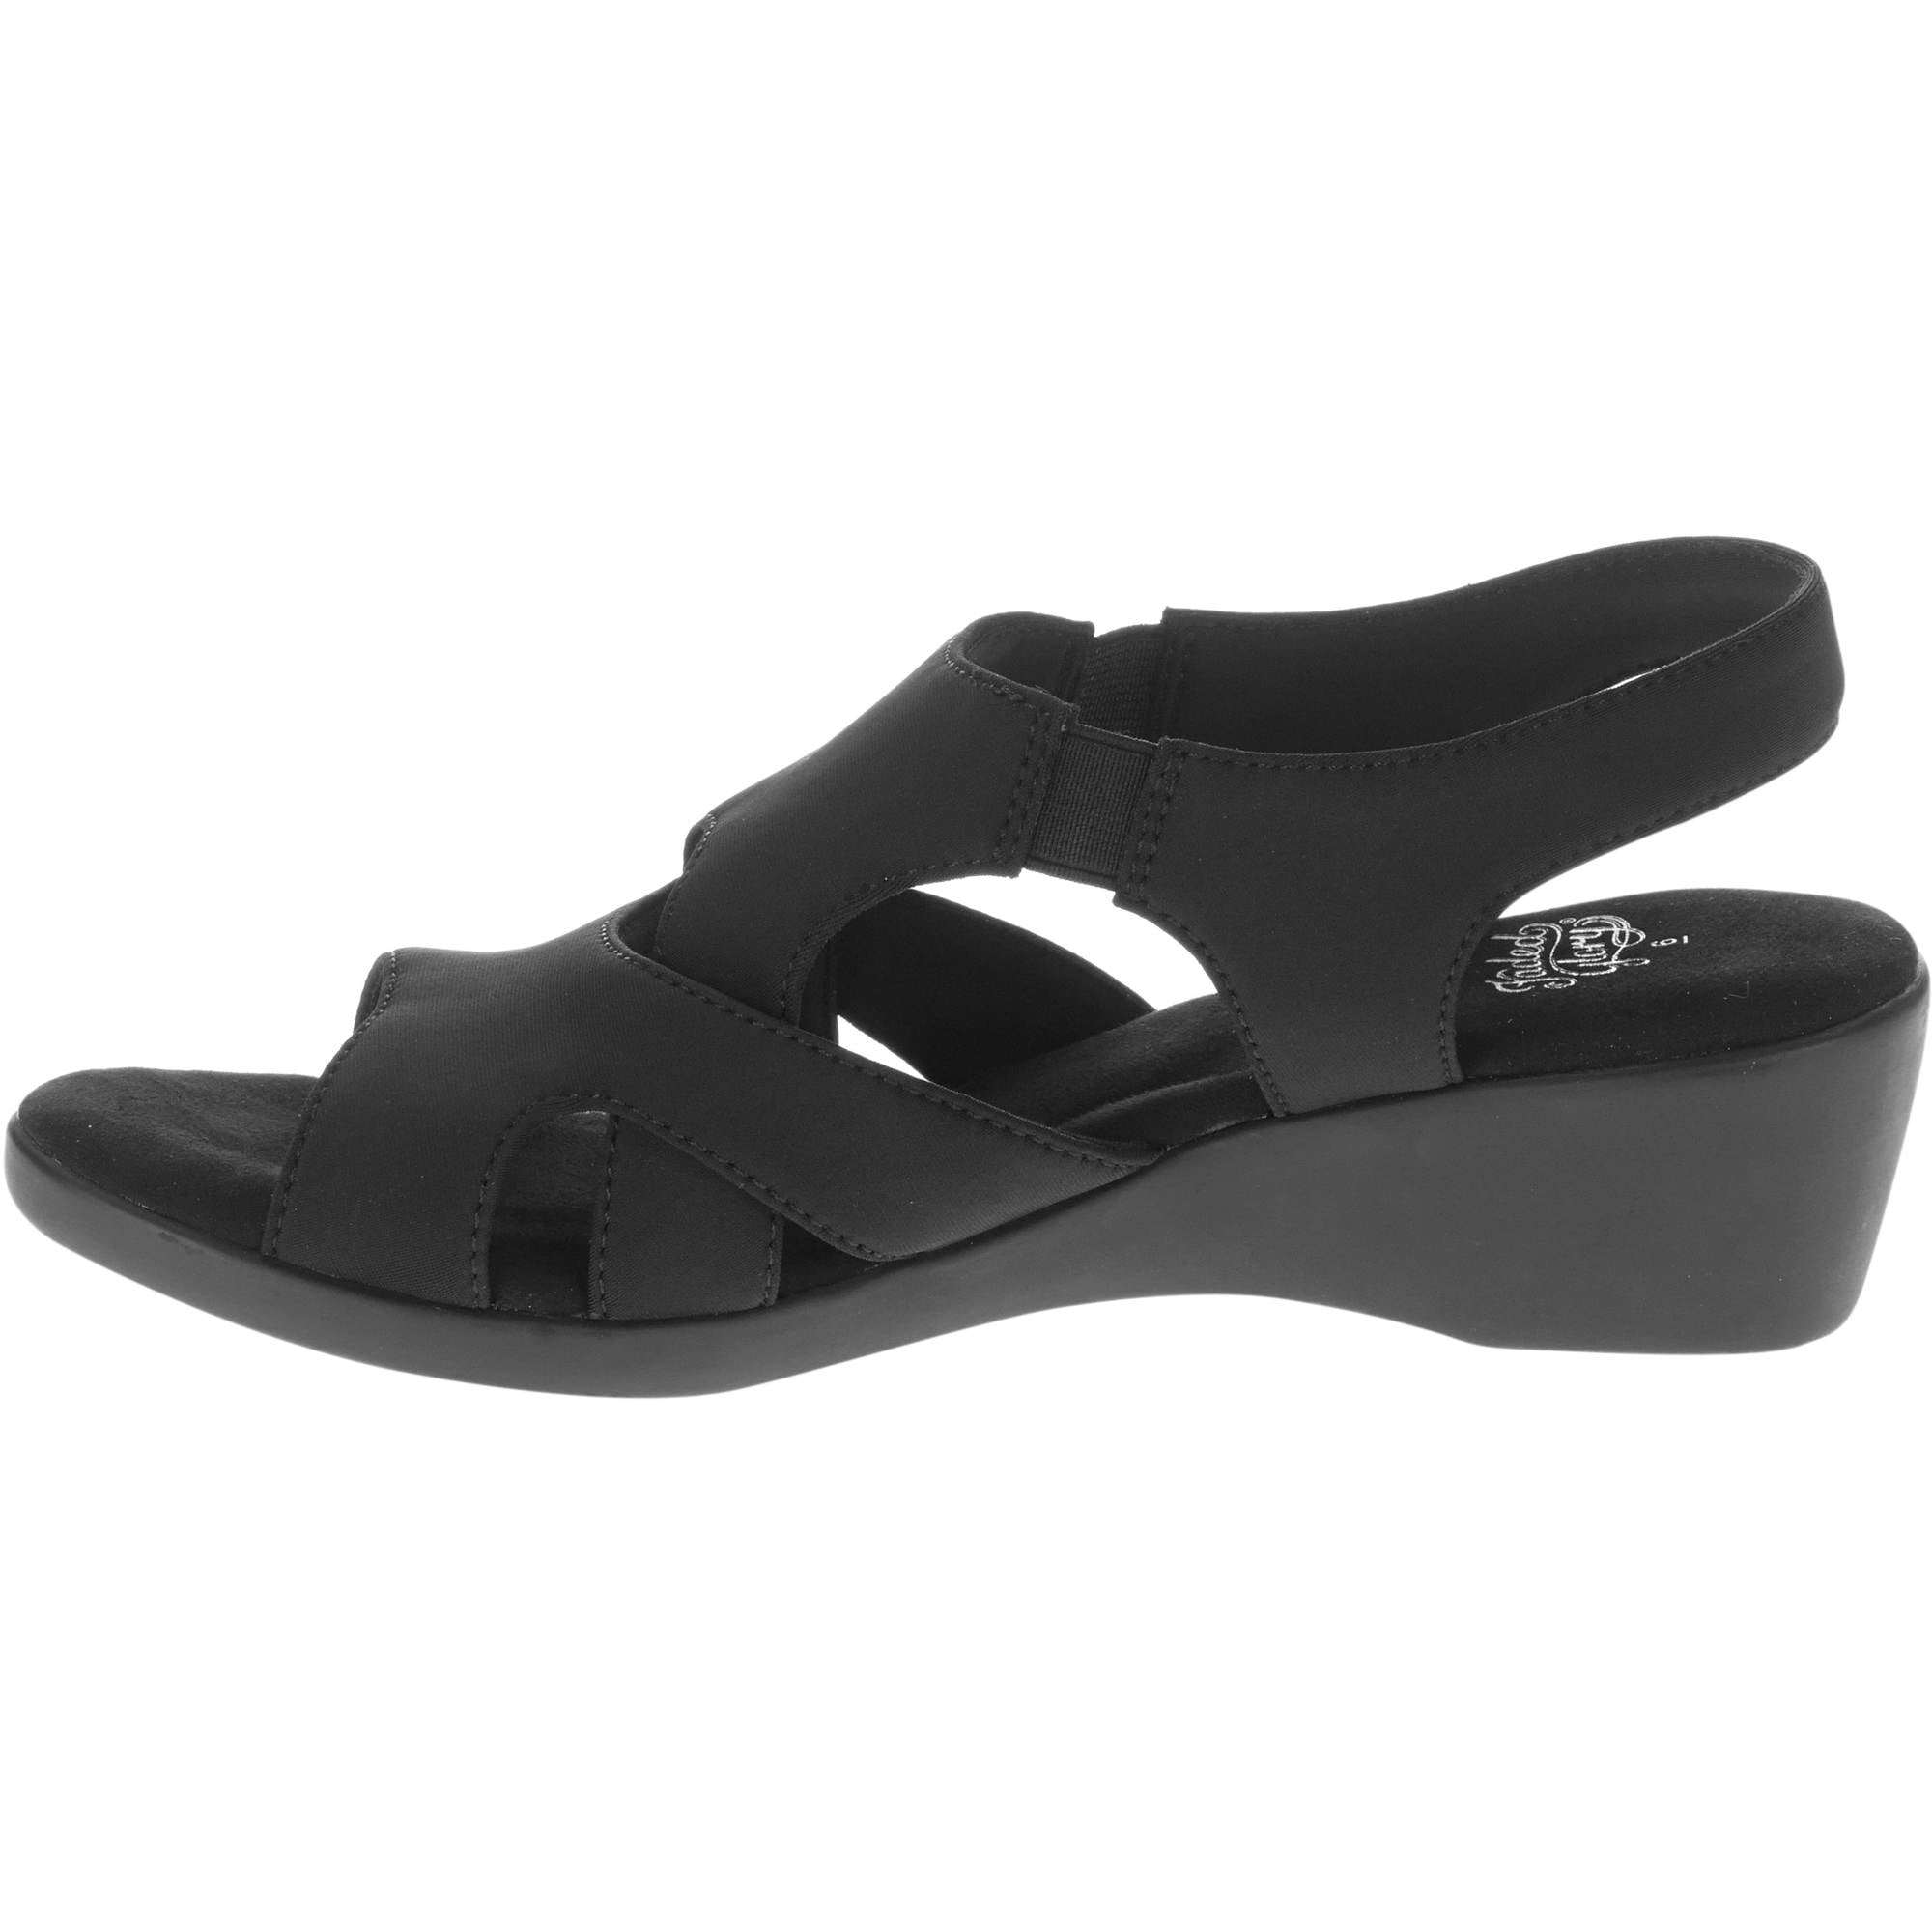 Indifference mineral Revenue Womens Faded Glory Comfort Wedge - Walmart.com